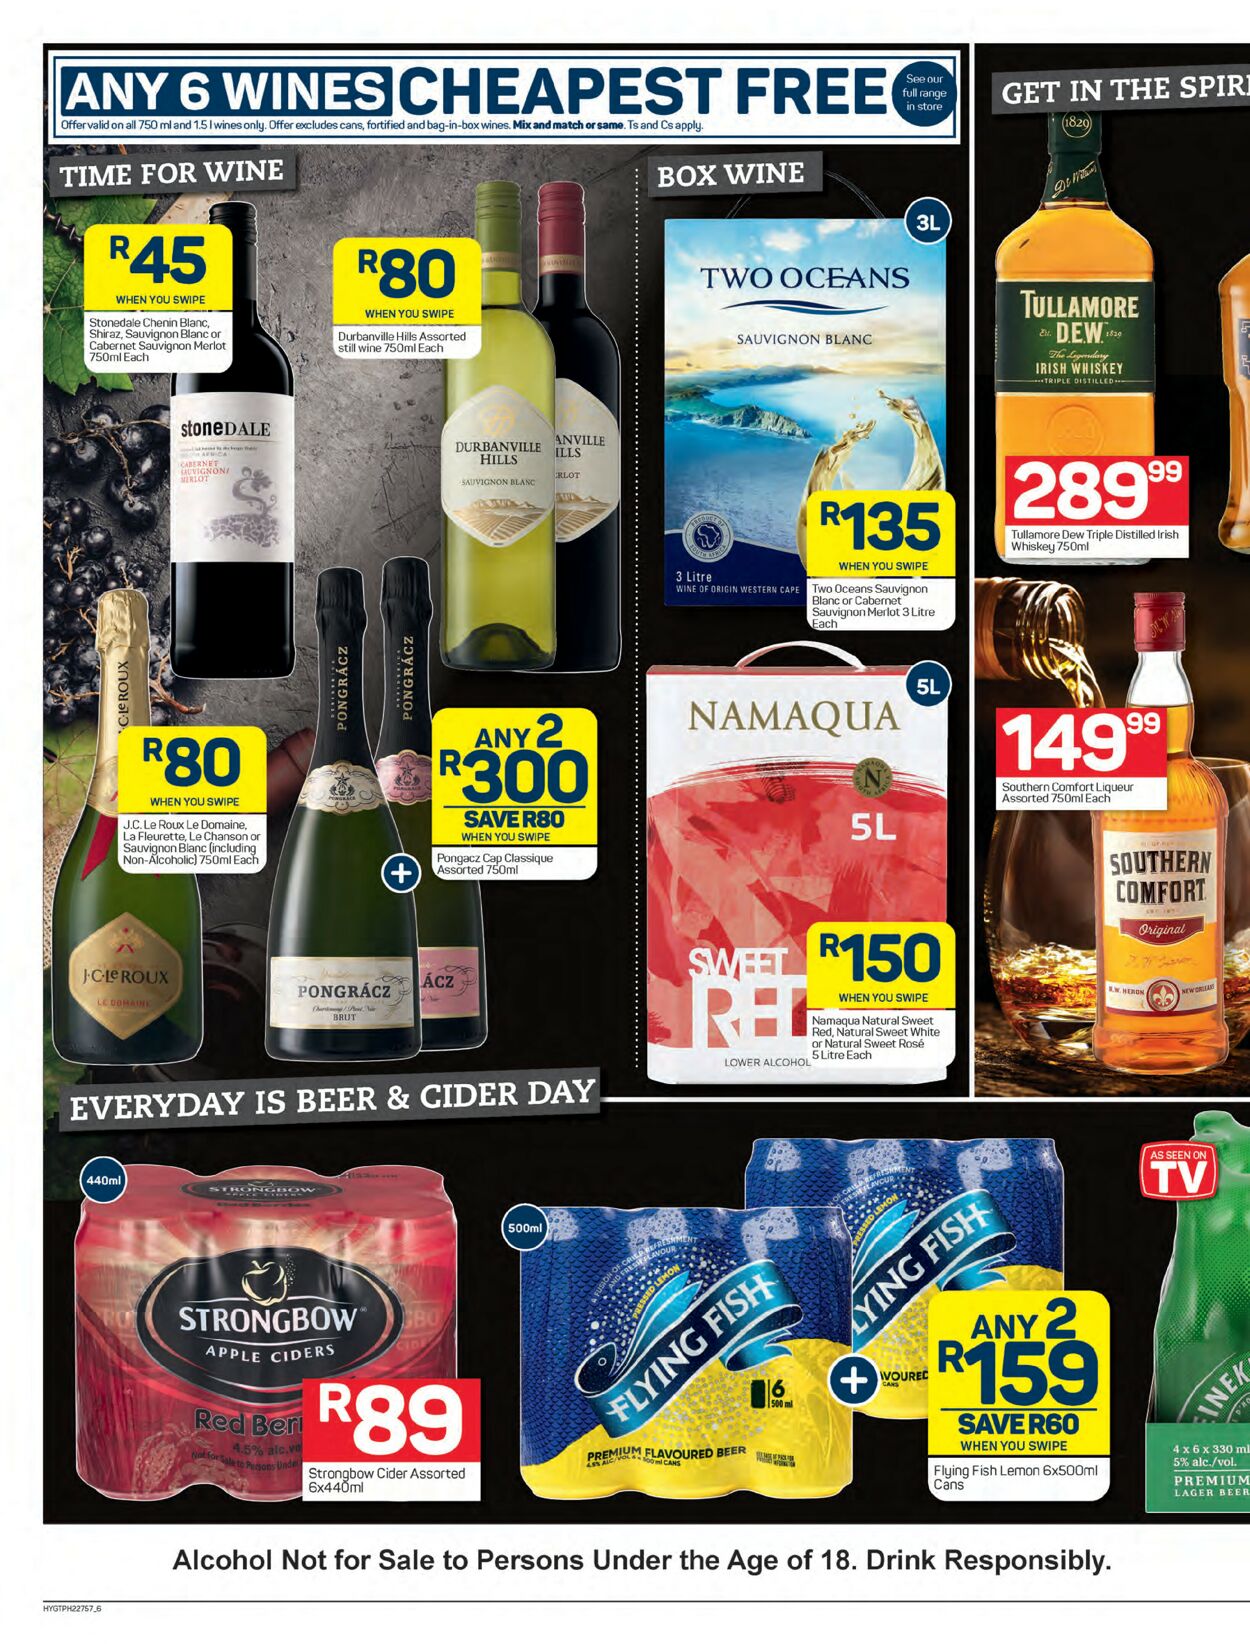 Pick n Pay Catalogue - 2023/04/24-2023/05/07 (Page 6)